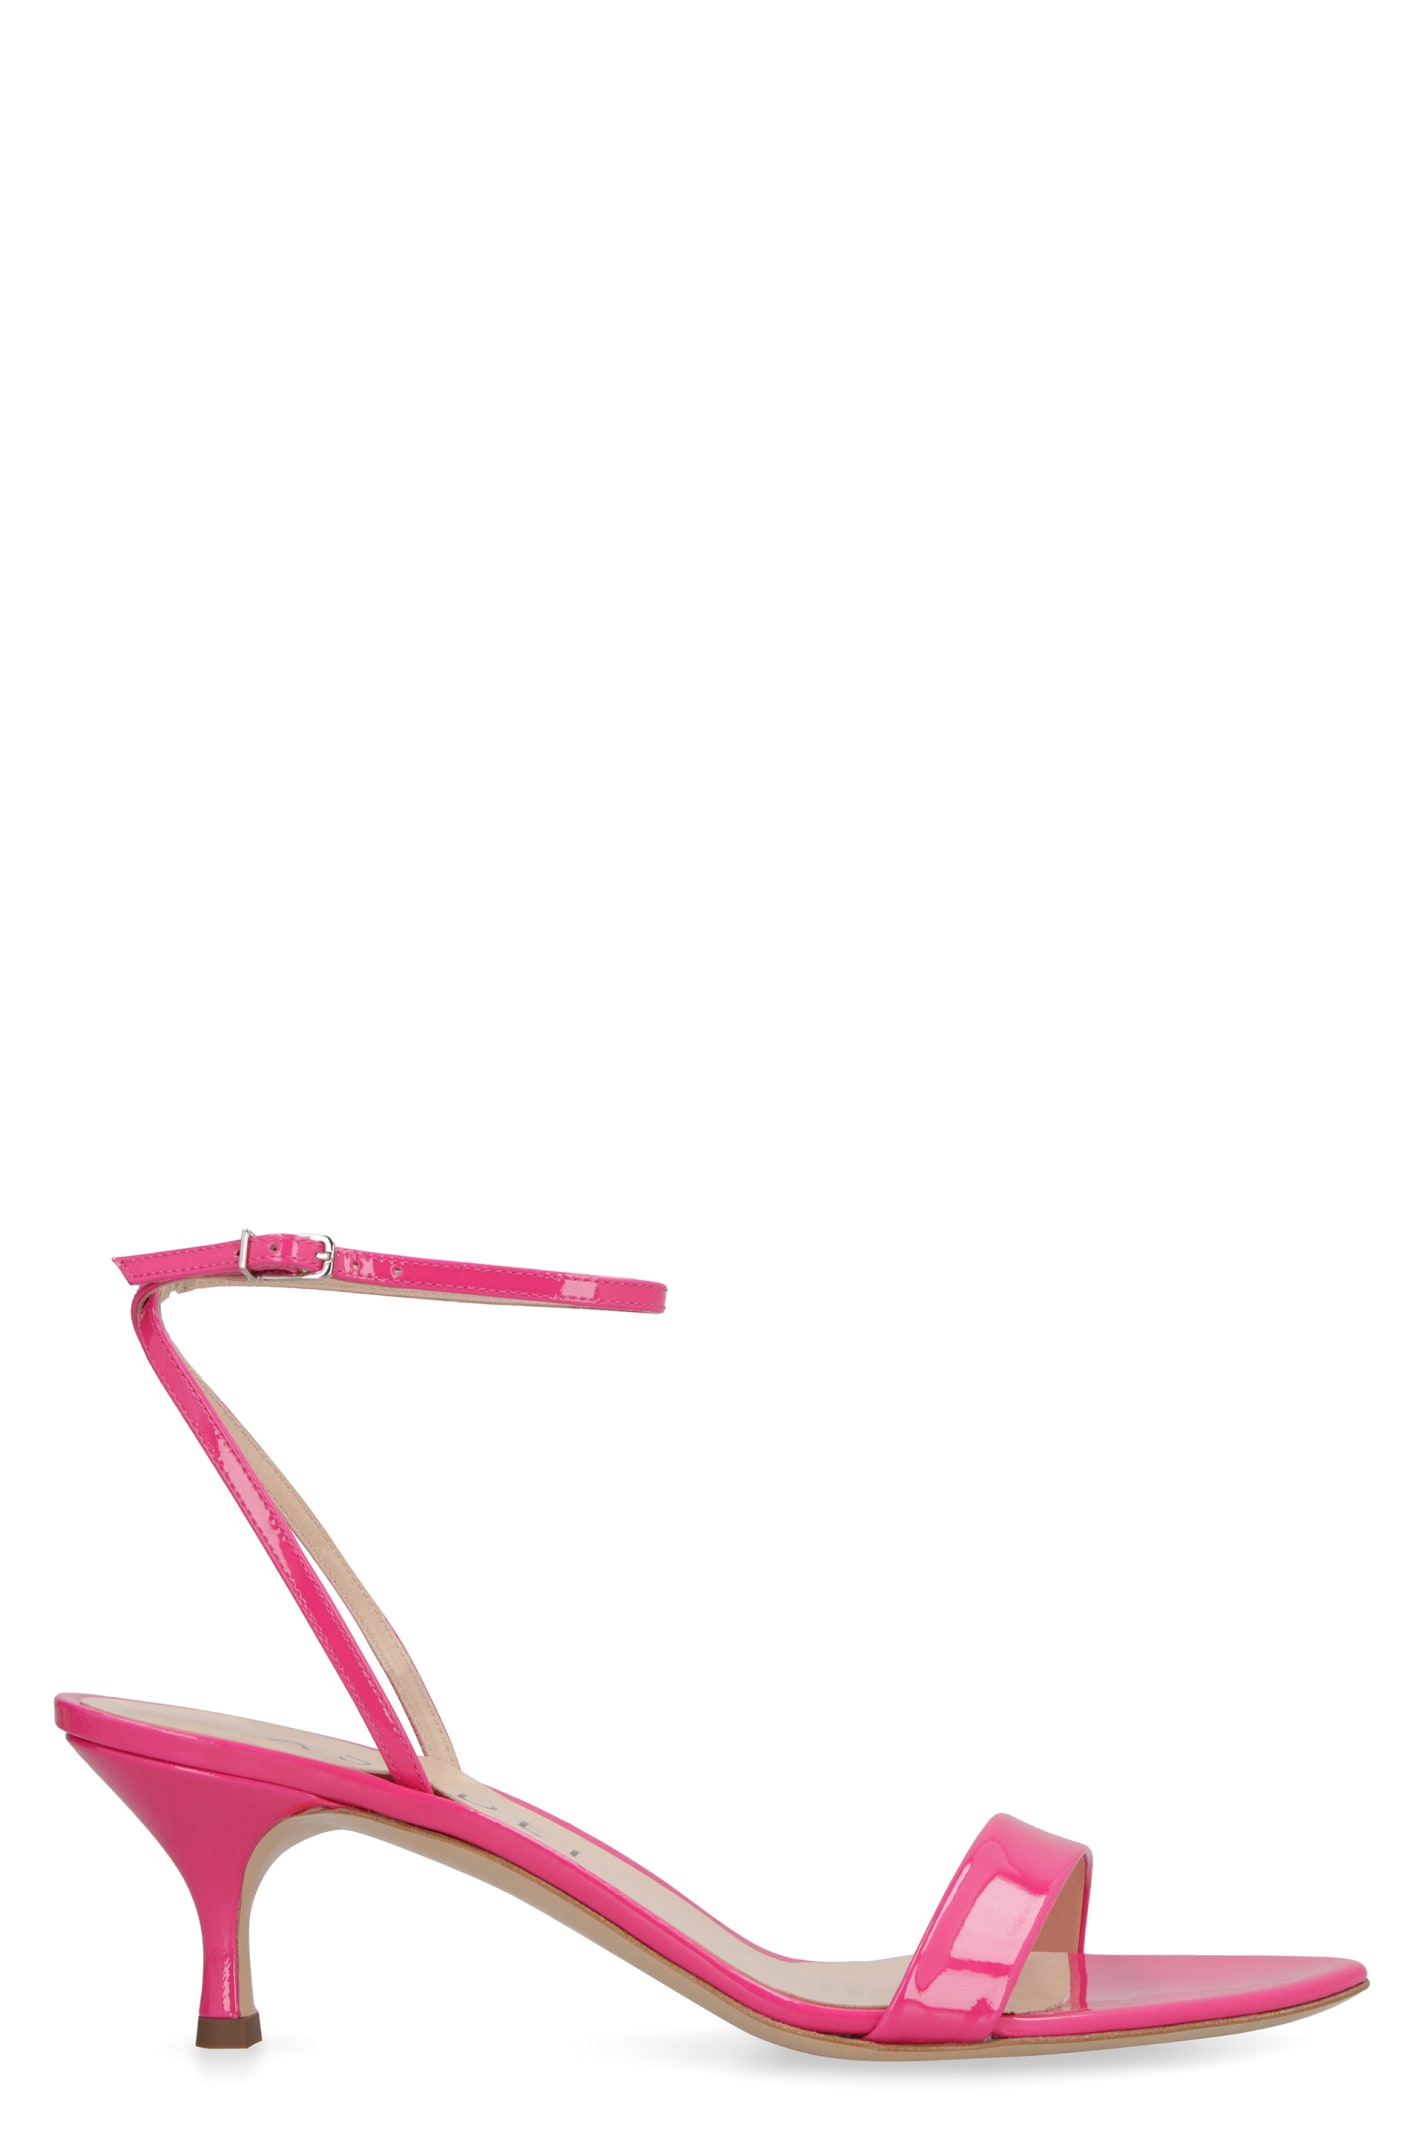 CASADEI SCARLET PATENT LEATHER SANDALS